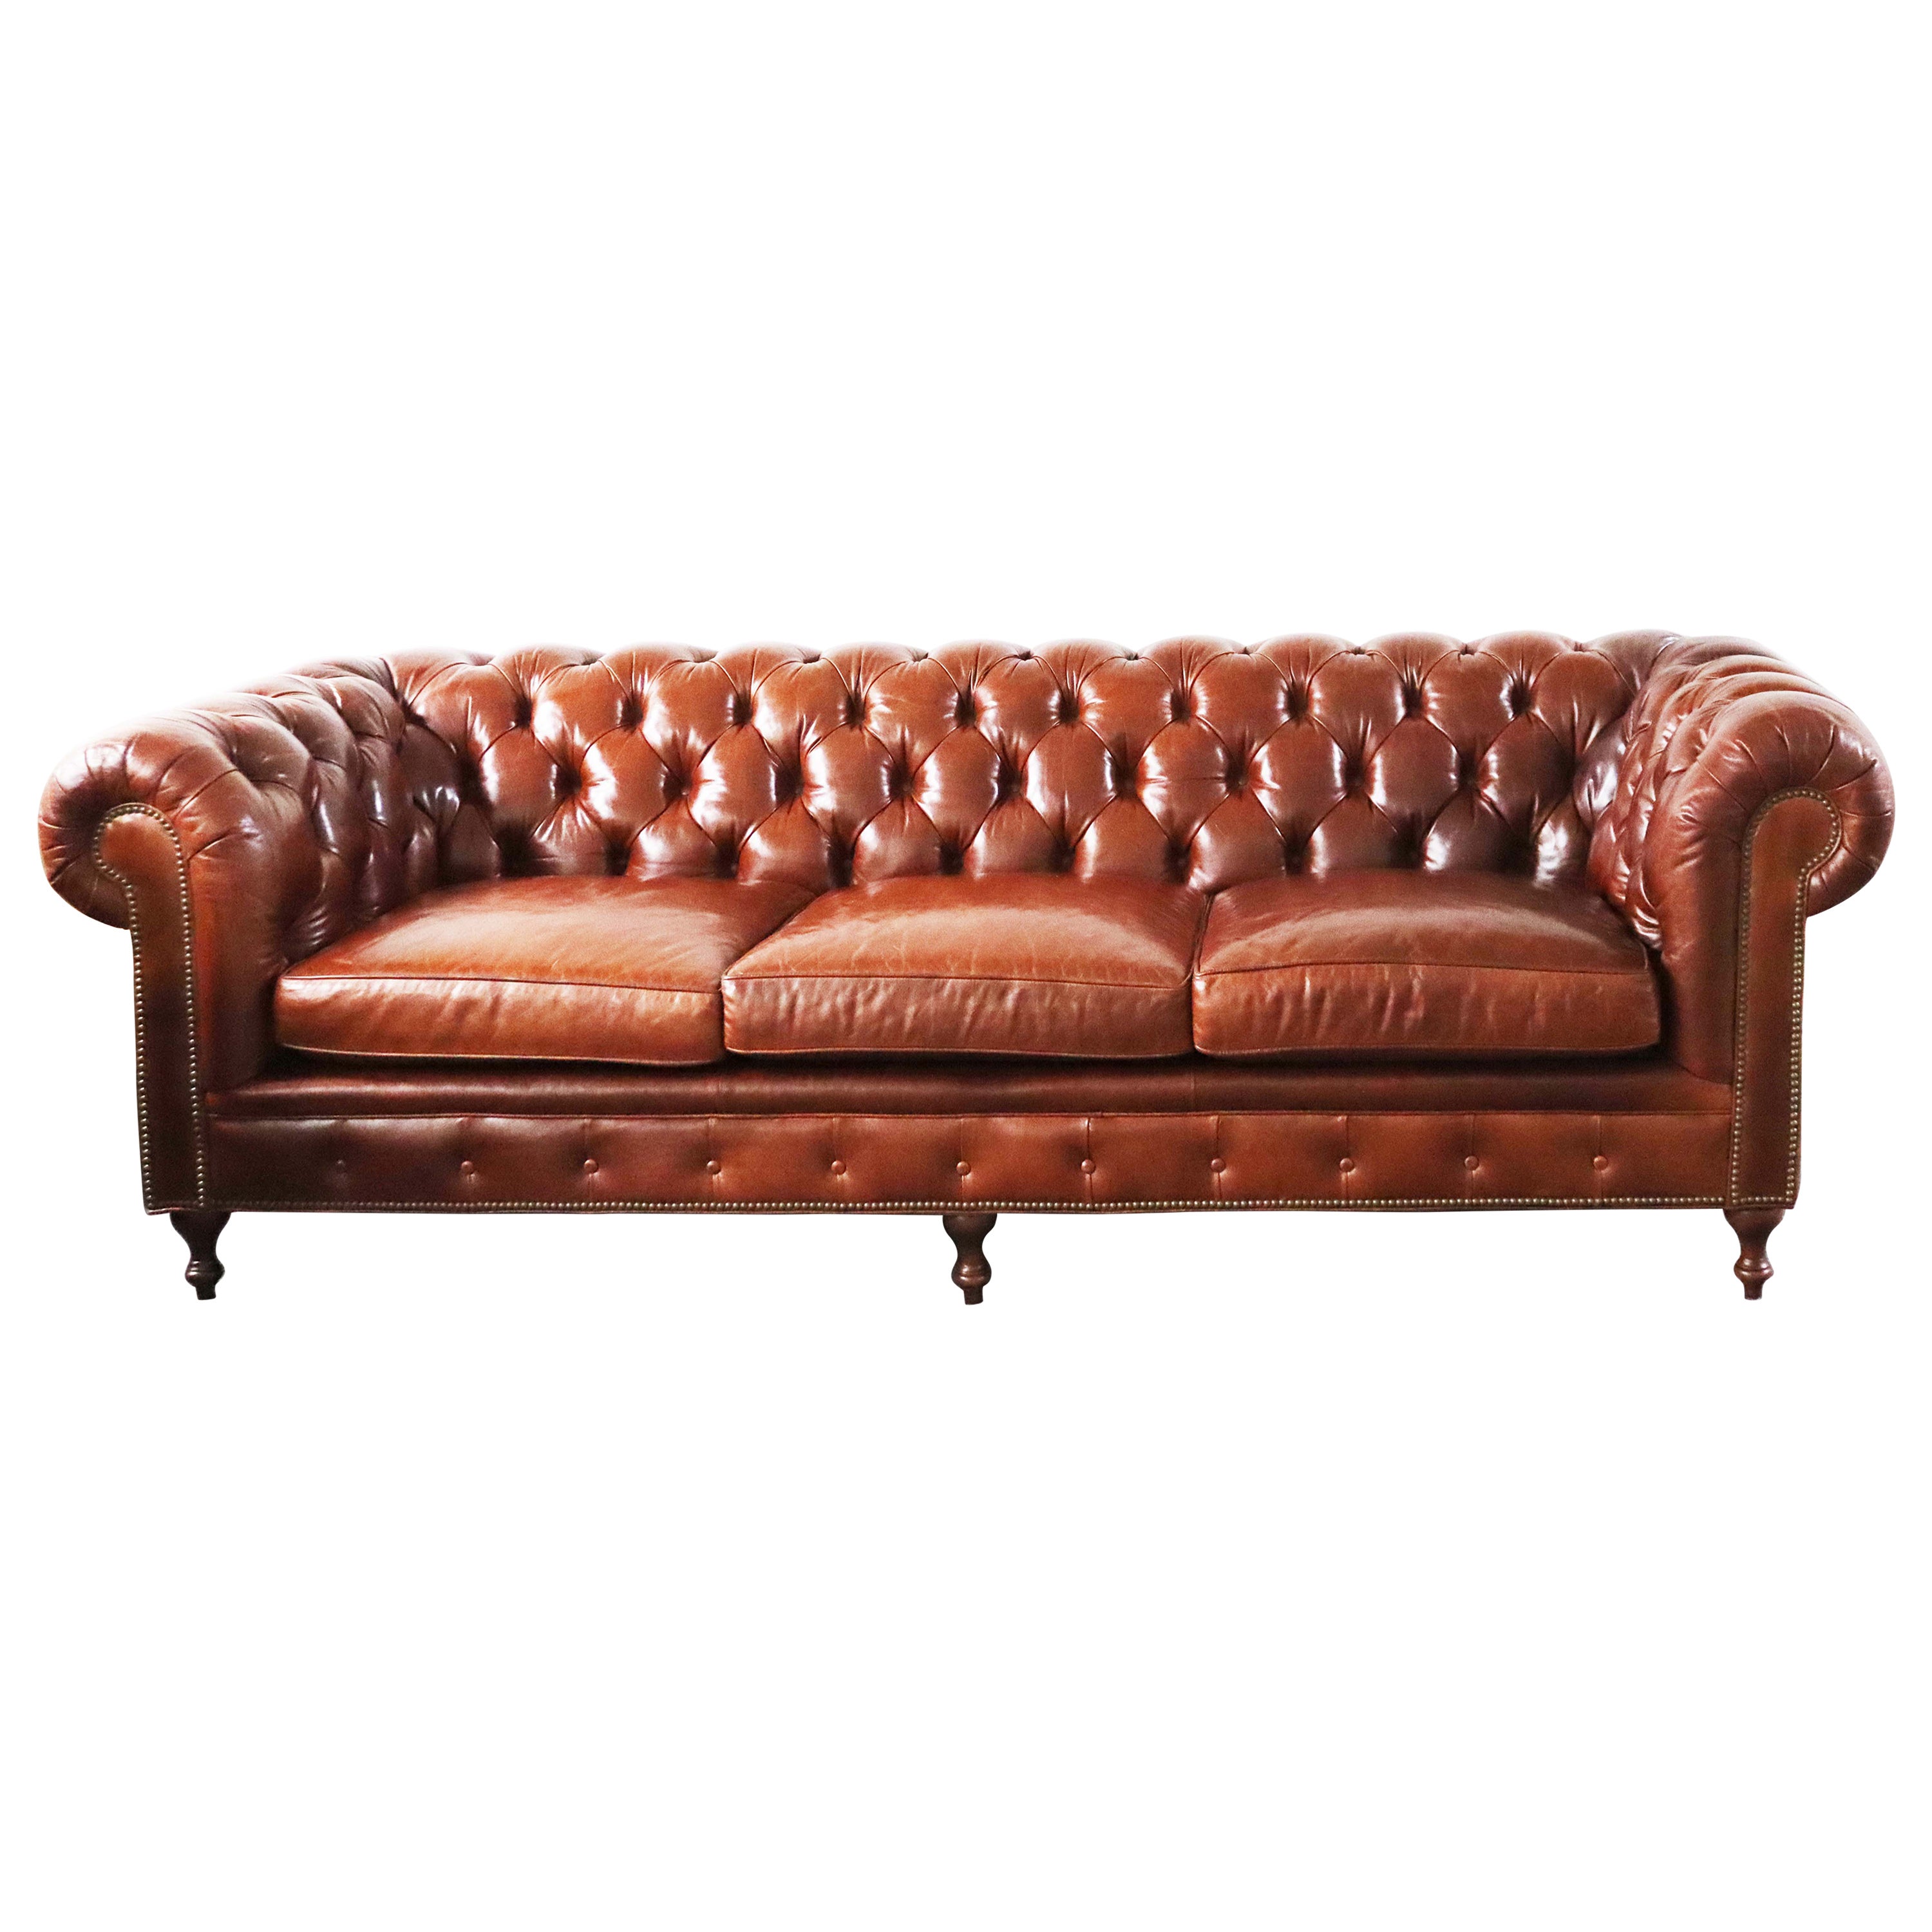 Arhaus Wessex Leather Tufted Sofa